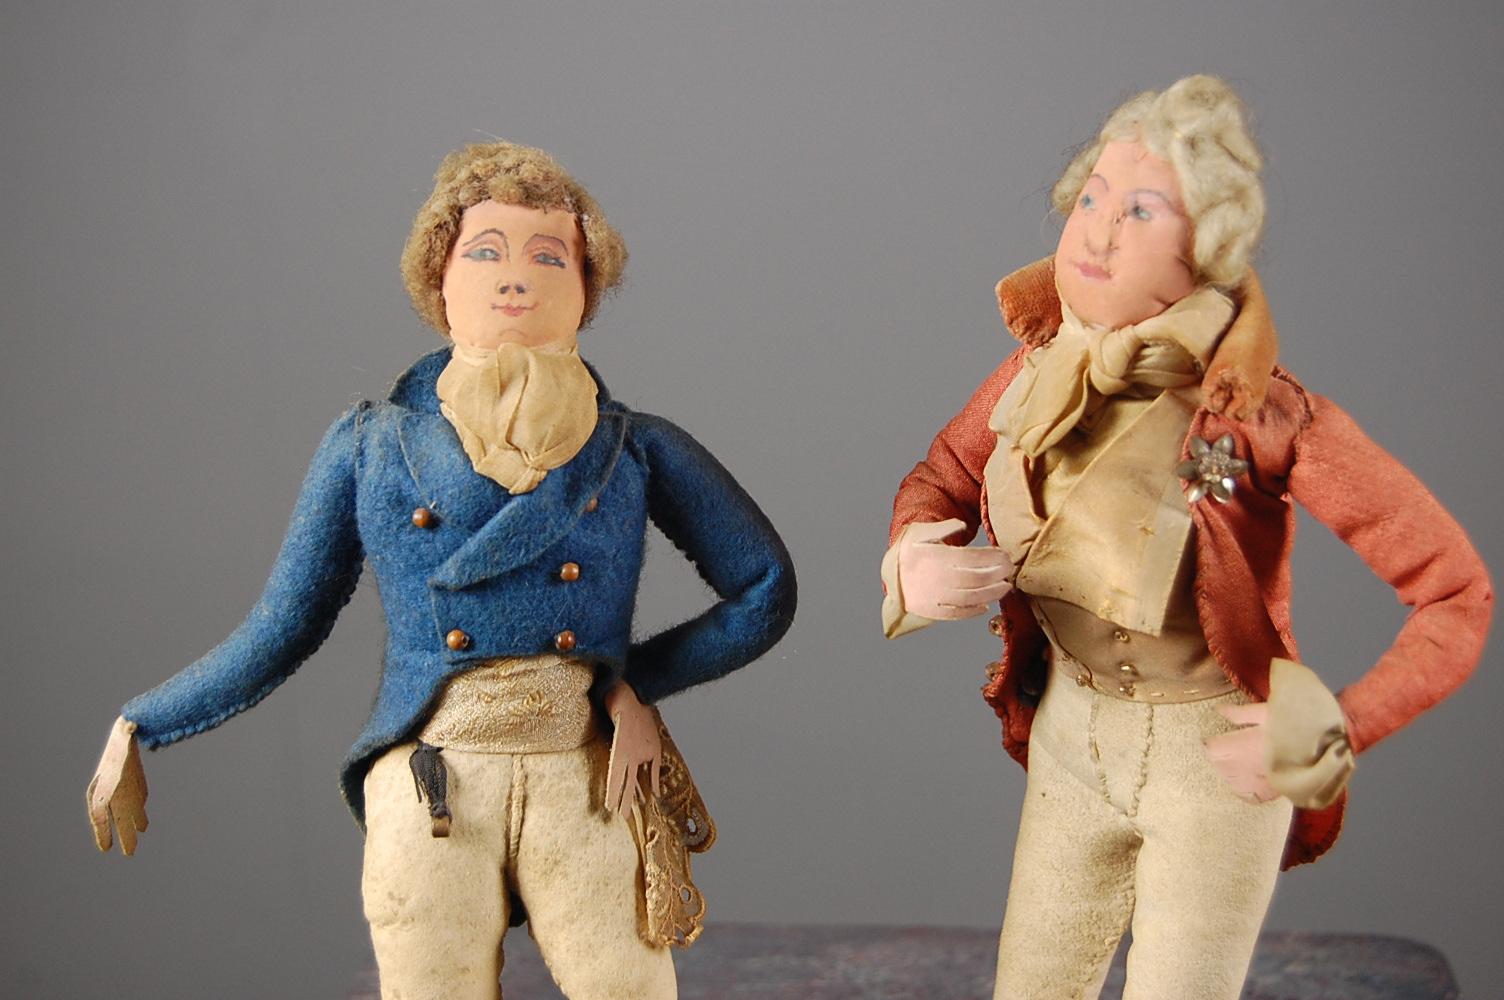 Wonderful pair of mid-19th century Georgian Dandy figures. Exquisitely made in mixed media of silk, leather, fabric. incredible attention to detail with handkerchiefs, buttons, and buttonholes, England, circa 1850. Priced for the pair.